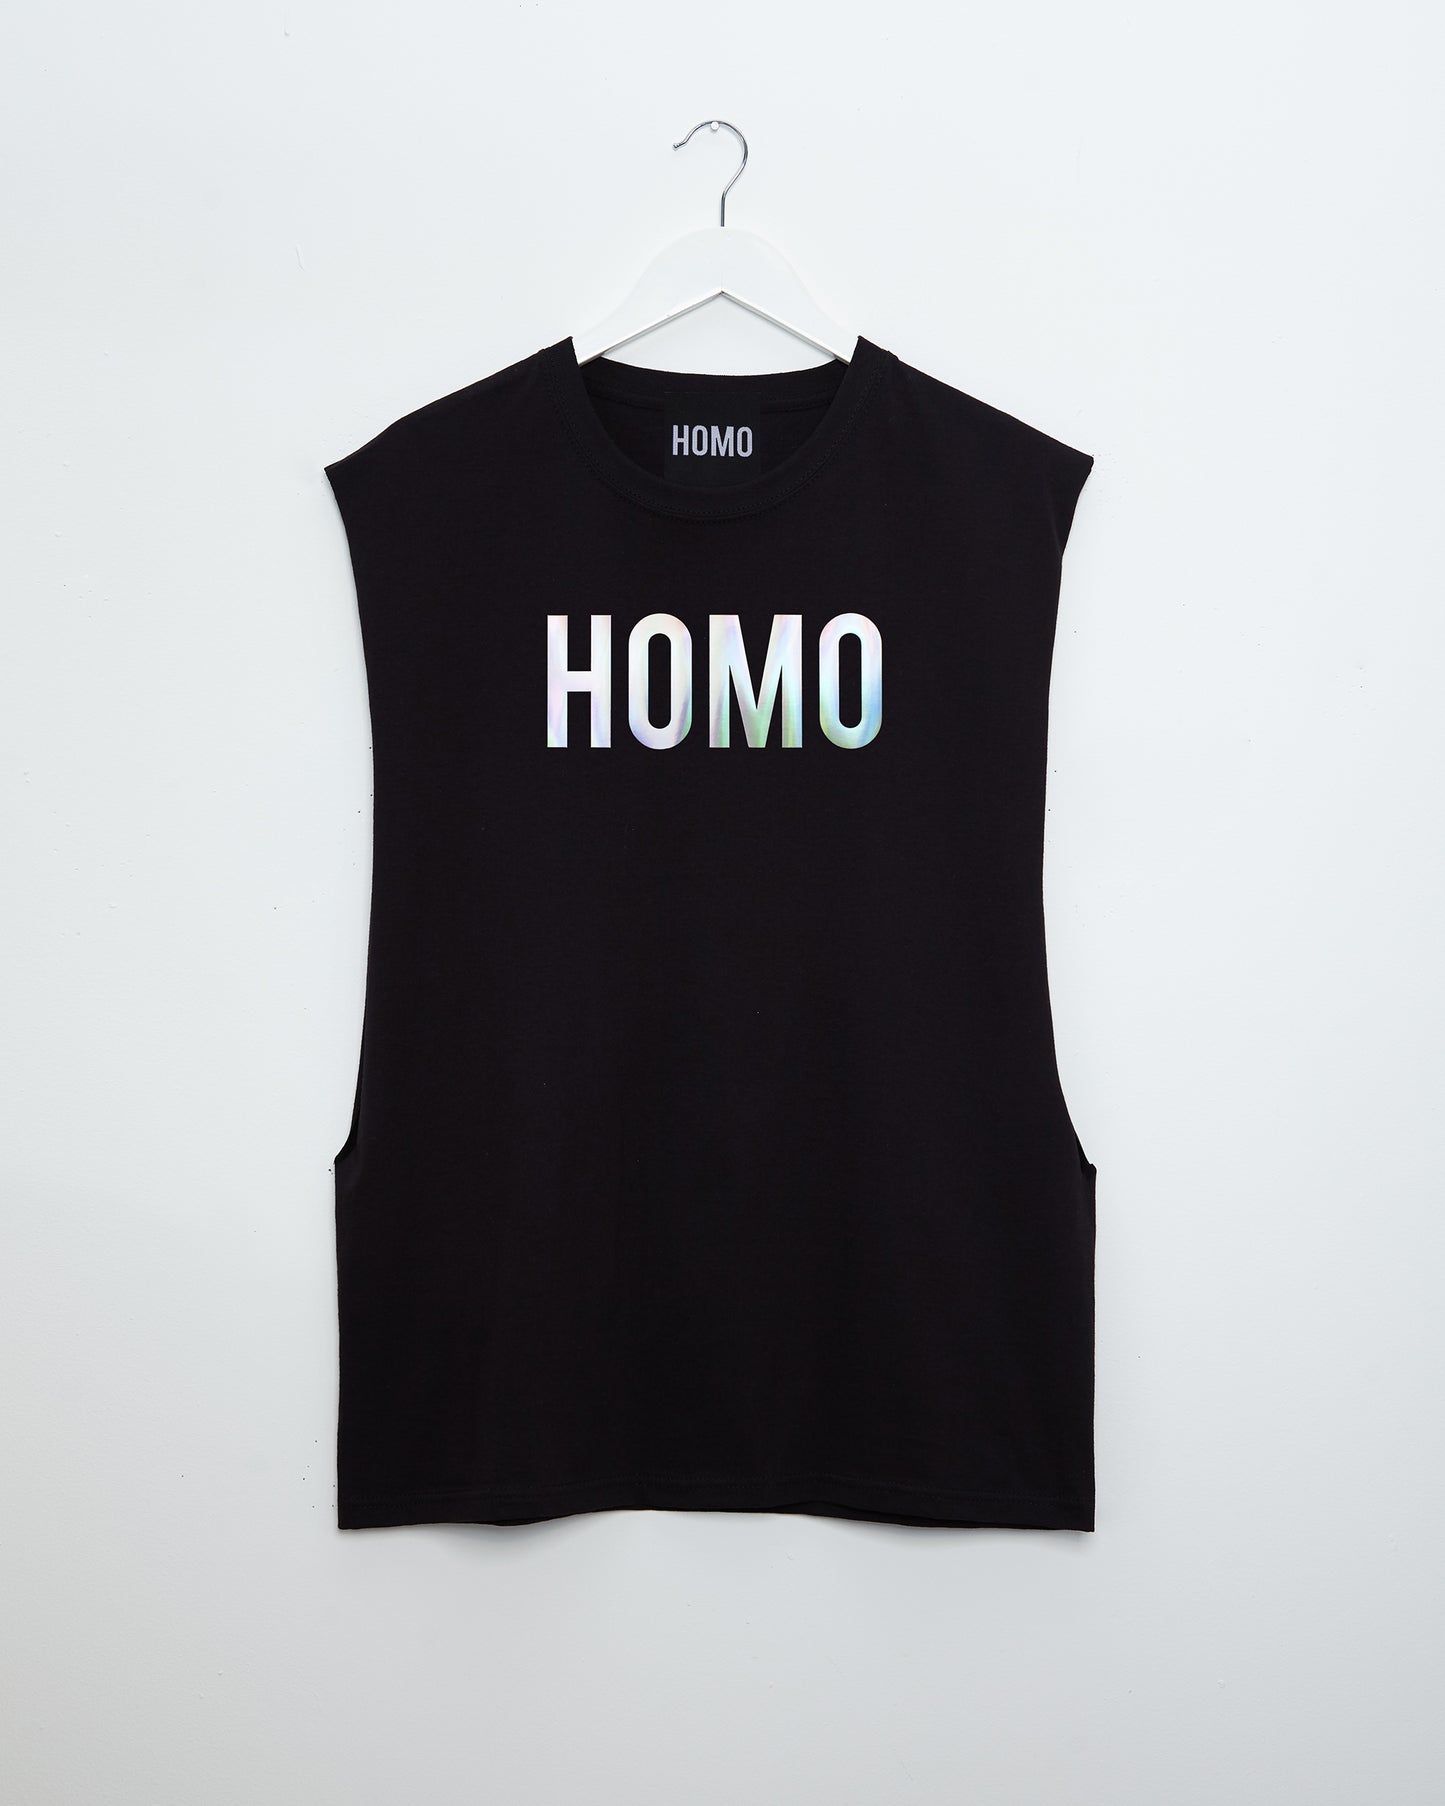 Double pack - HOMO, hologram/black - sideless tee & basketball shorts - full outfit.